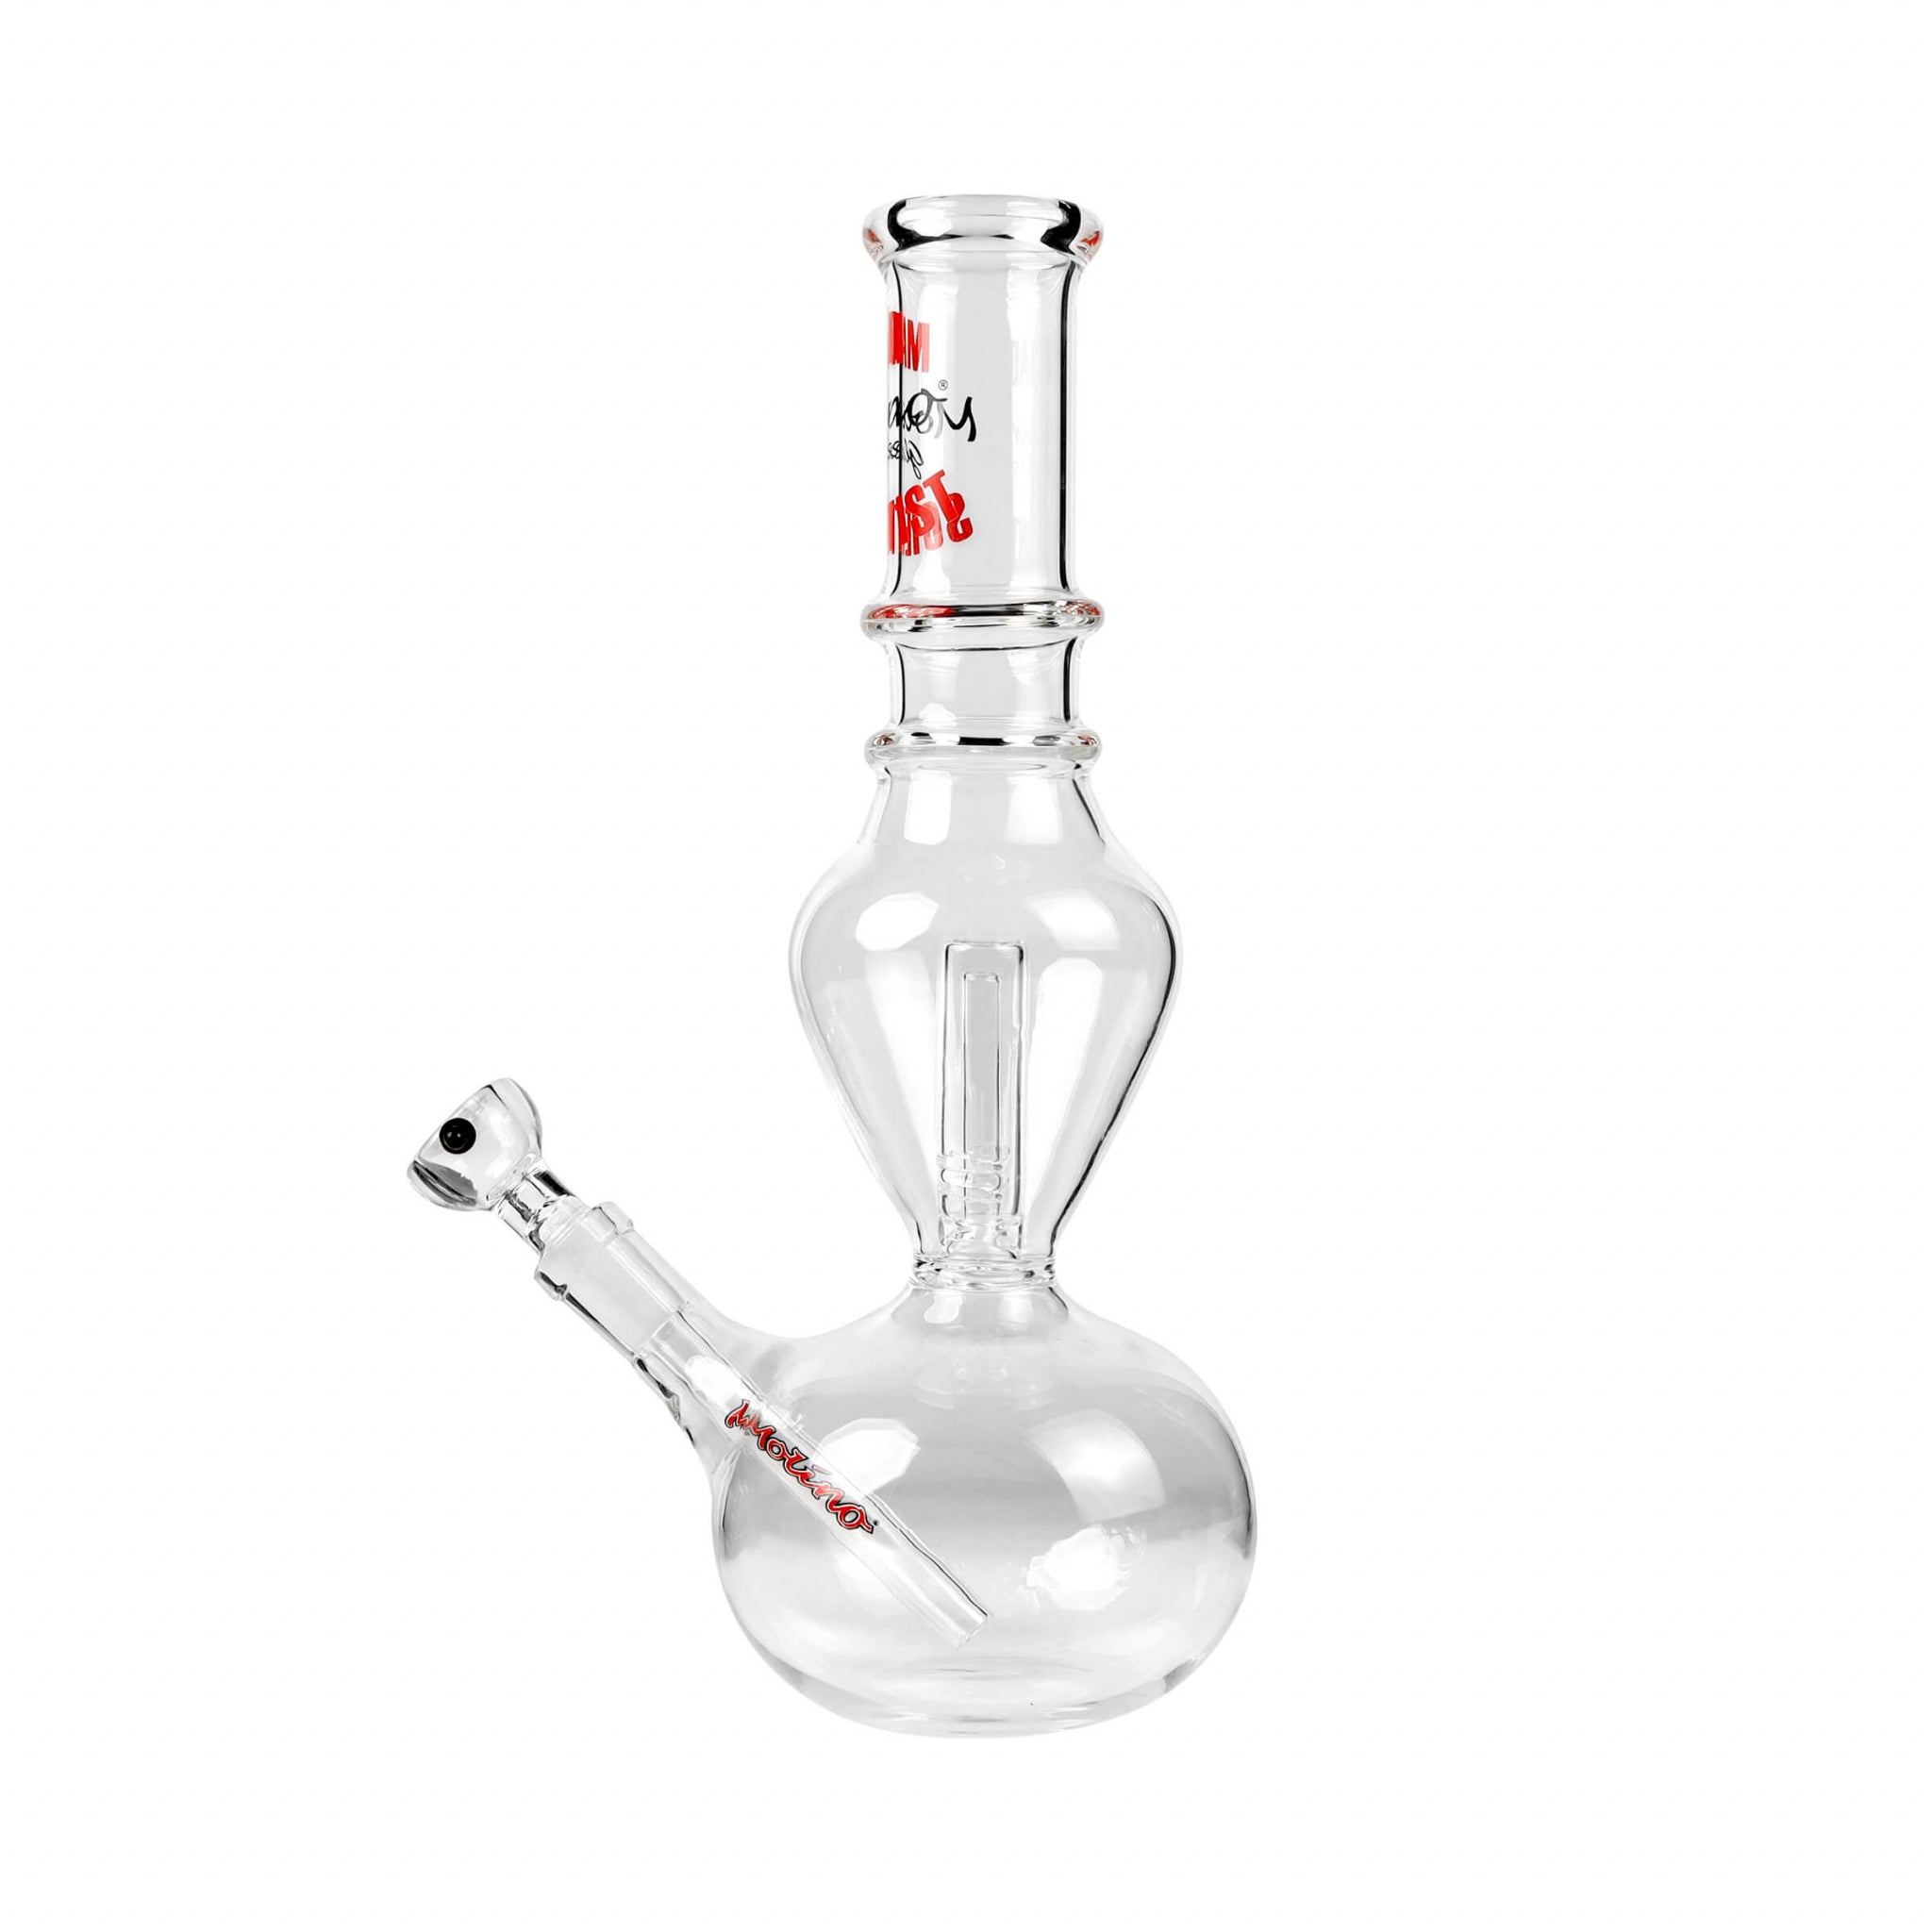 Mad Scientist Glass Bongs - bongs with removable percolators